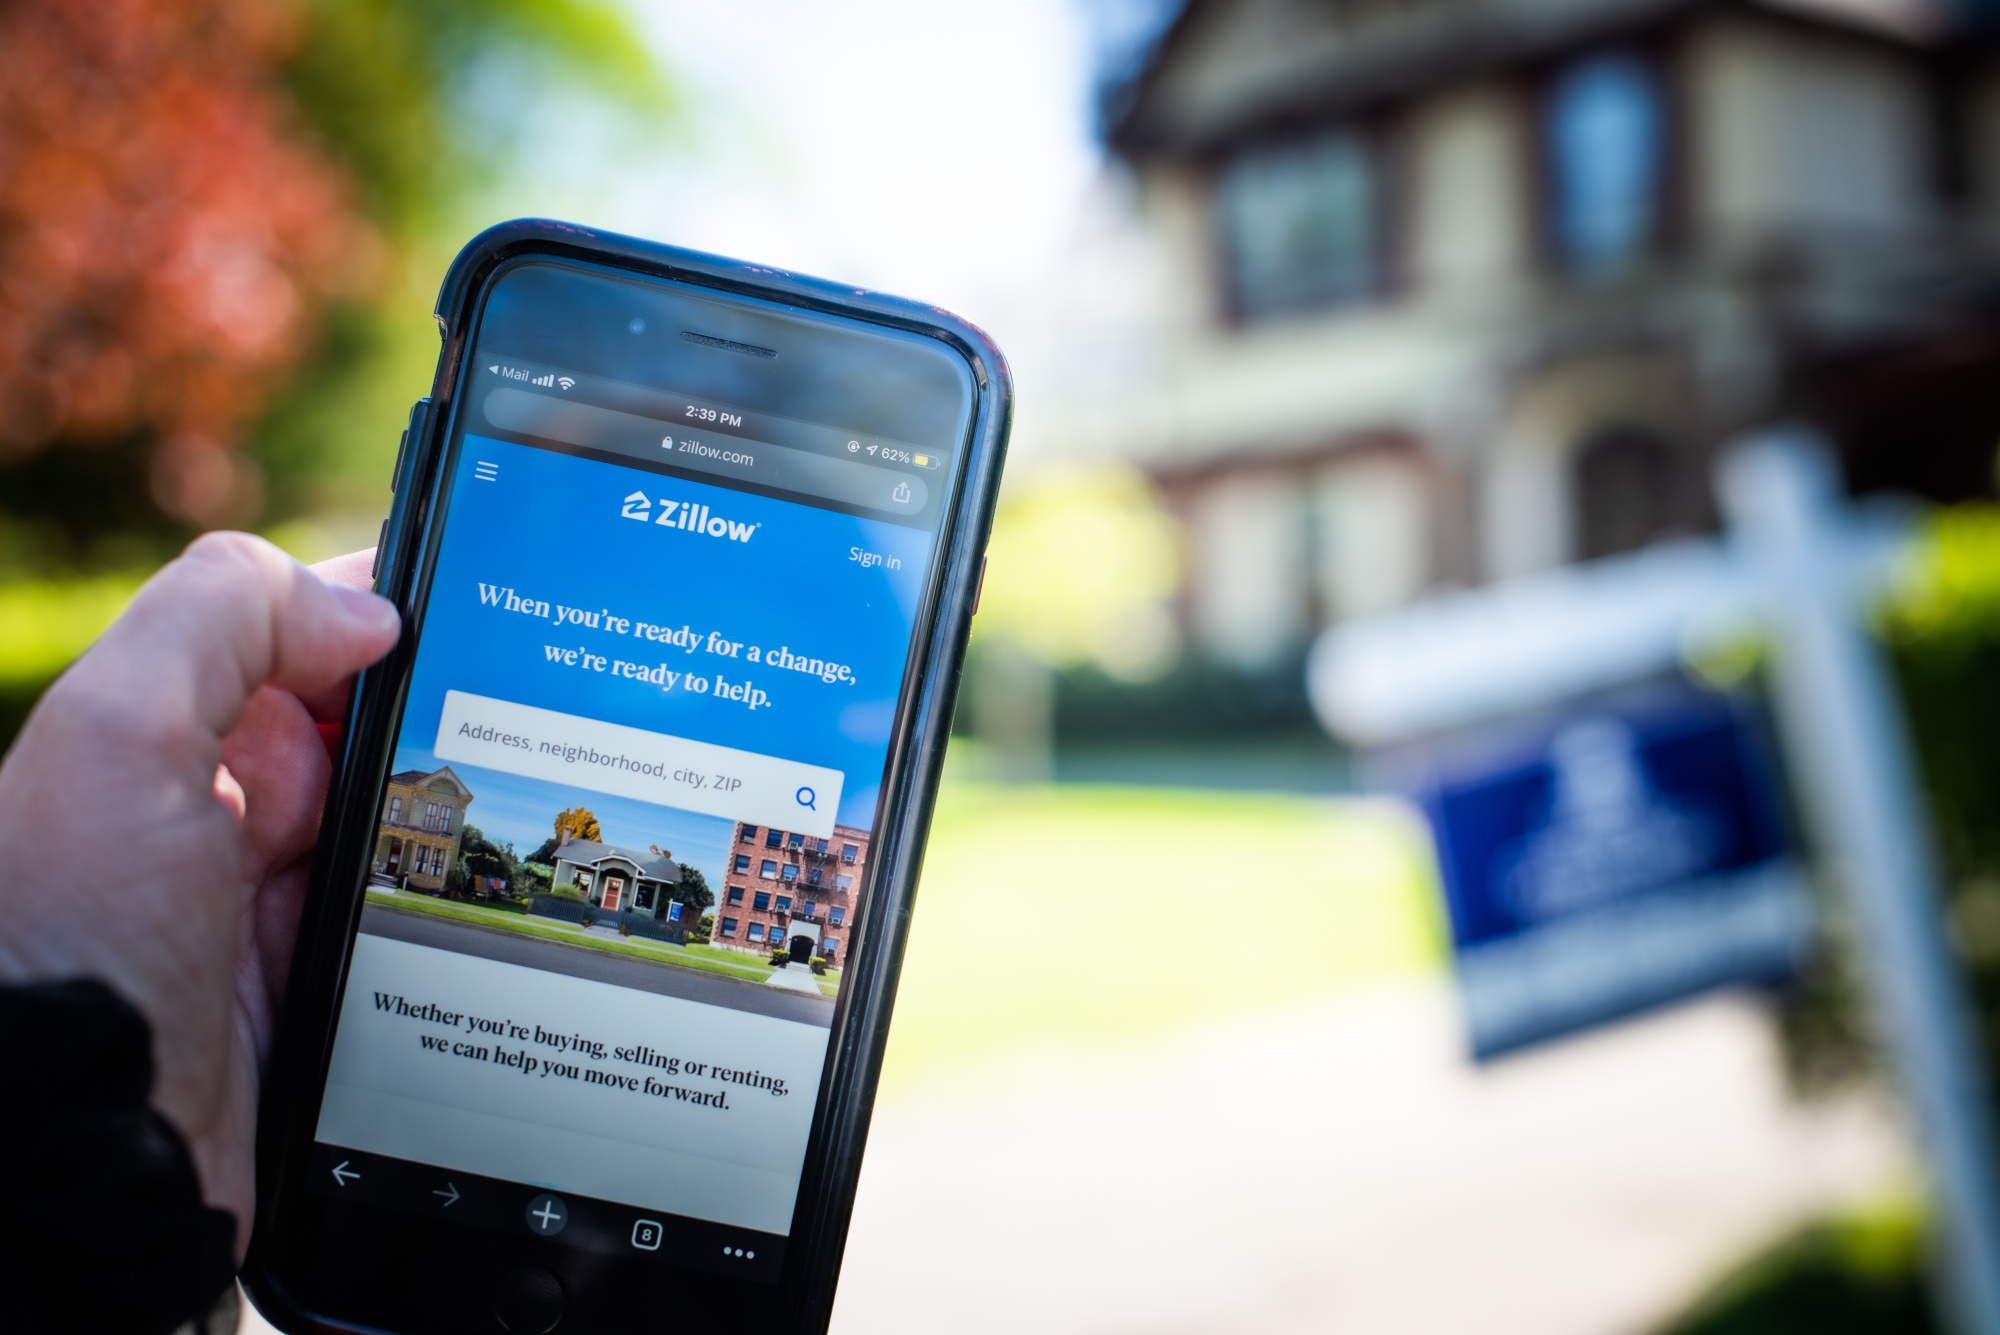 Zillow Home-Flipping App Was Big Idea Gone Wrong - Bloomberg